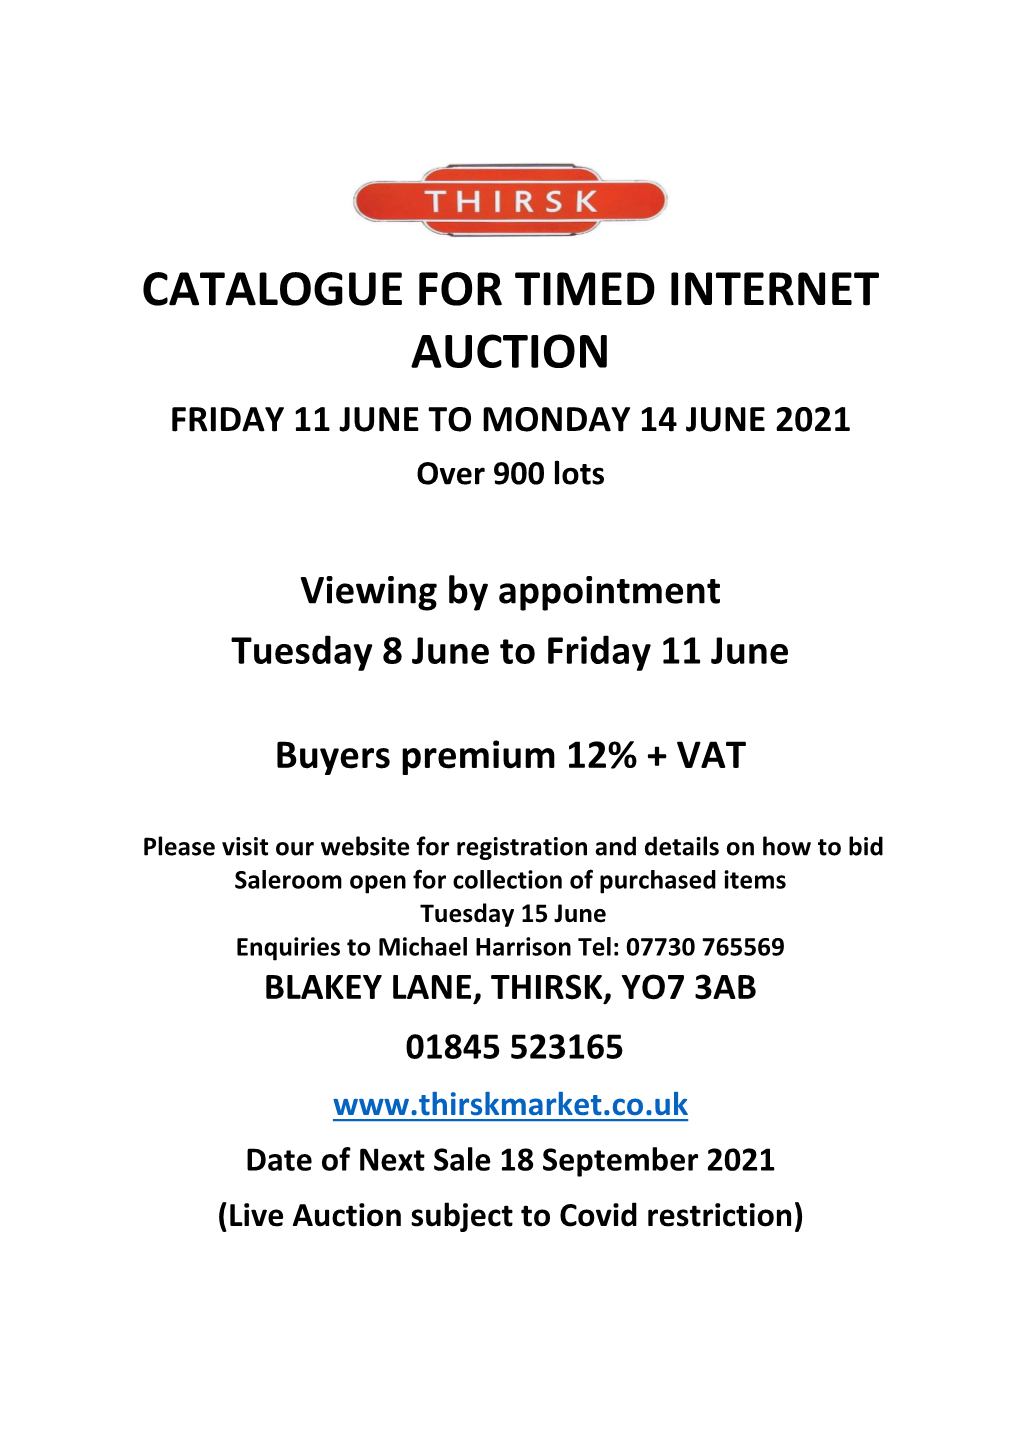 CATALOGUE for TIMED INTERNET AUCTION FRIDAY 11 JUNE to MONDAY 14 JUNE 2021 Over 900 Lots